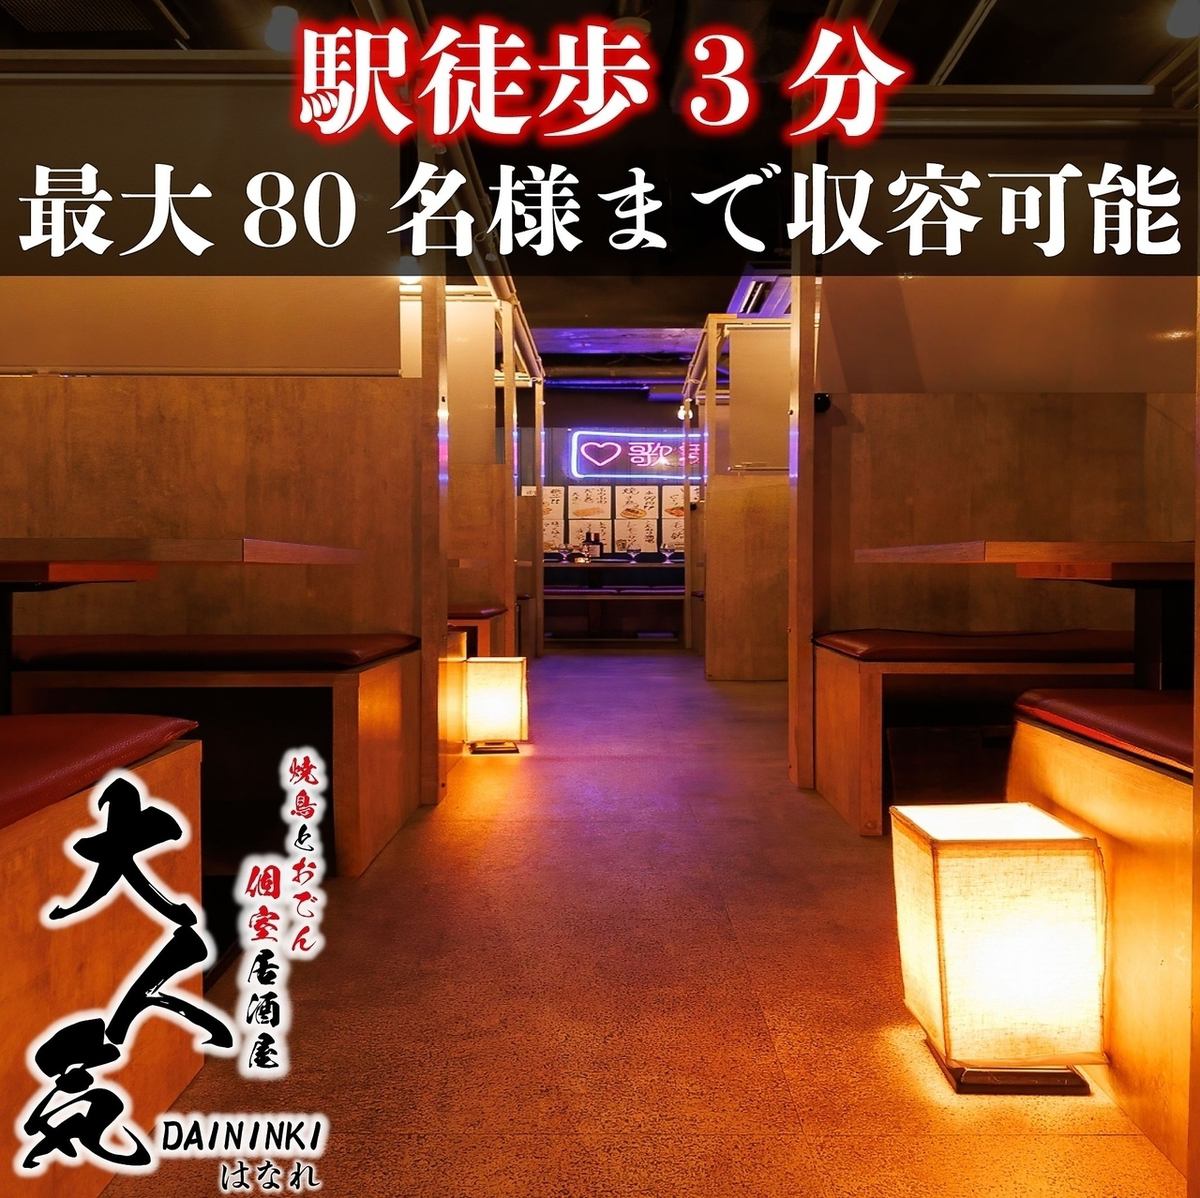 All-you-can-eat and drink of 130 dishes including oden with special soup stock is only 3,500 yen.